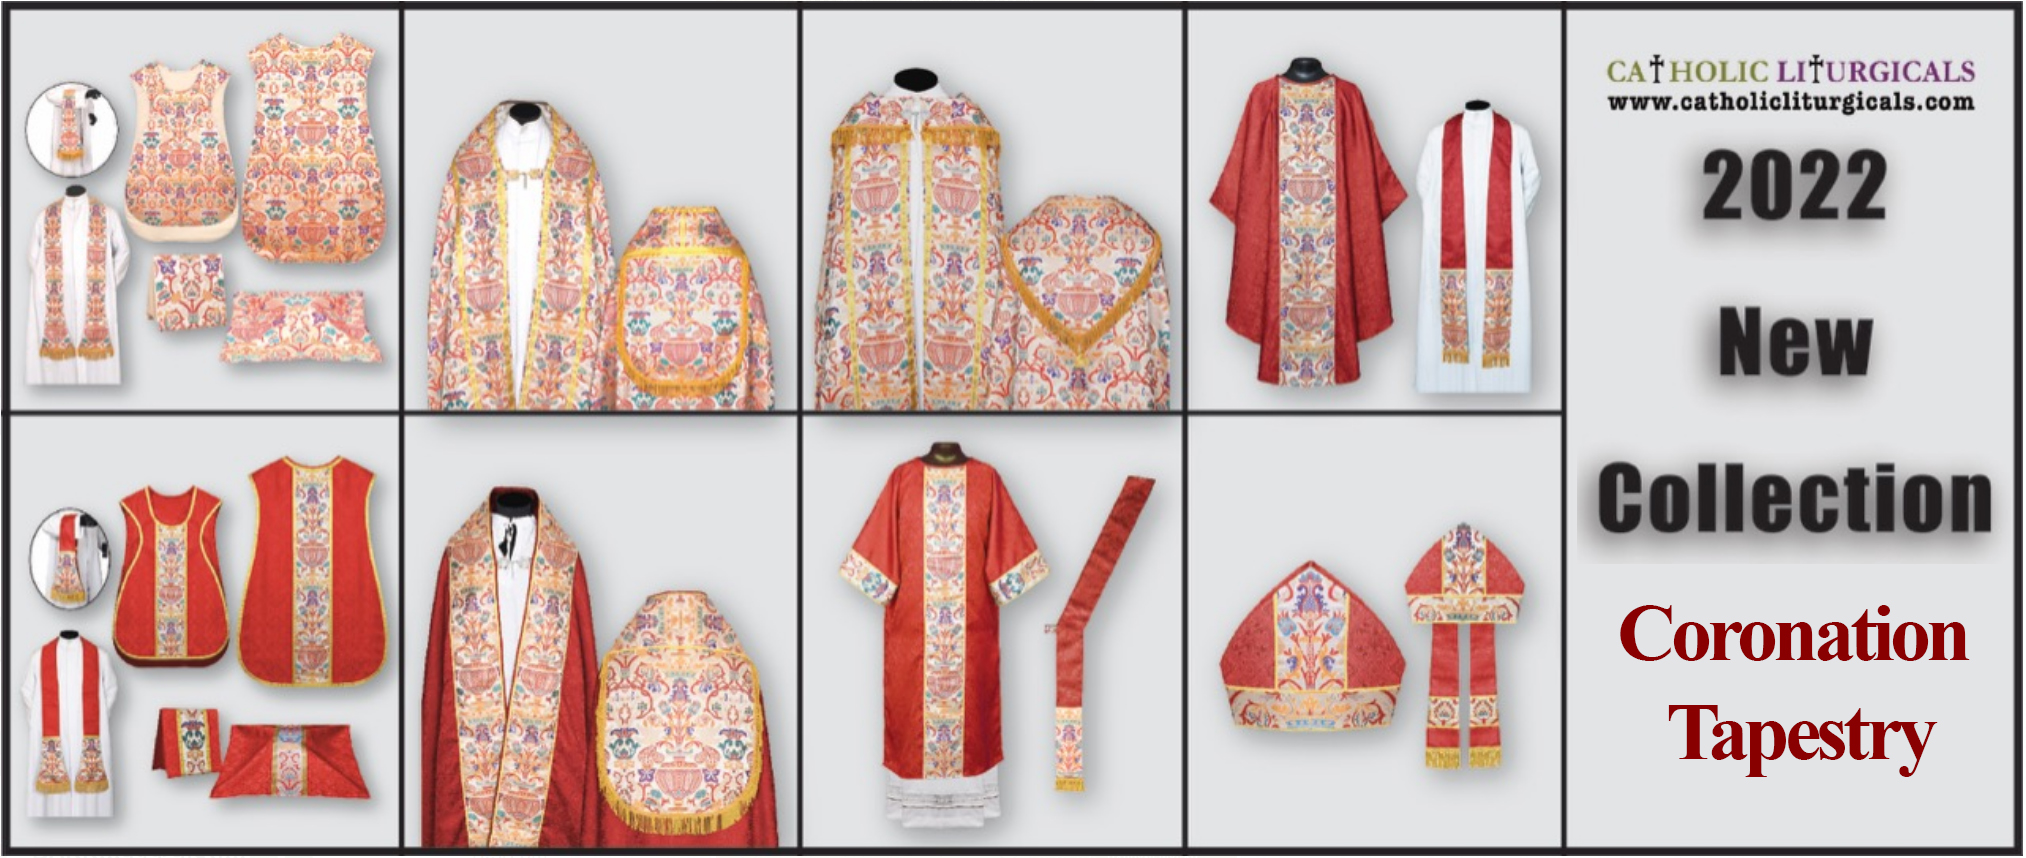 Coronation Tapestry Vestments - Chasubles, Copes, Dalmatics, Tunicles, Stoles - with Coronation Tapestry Fabric